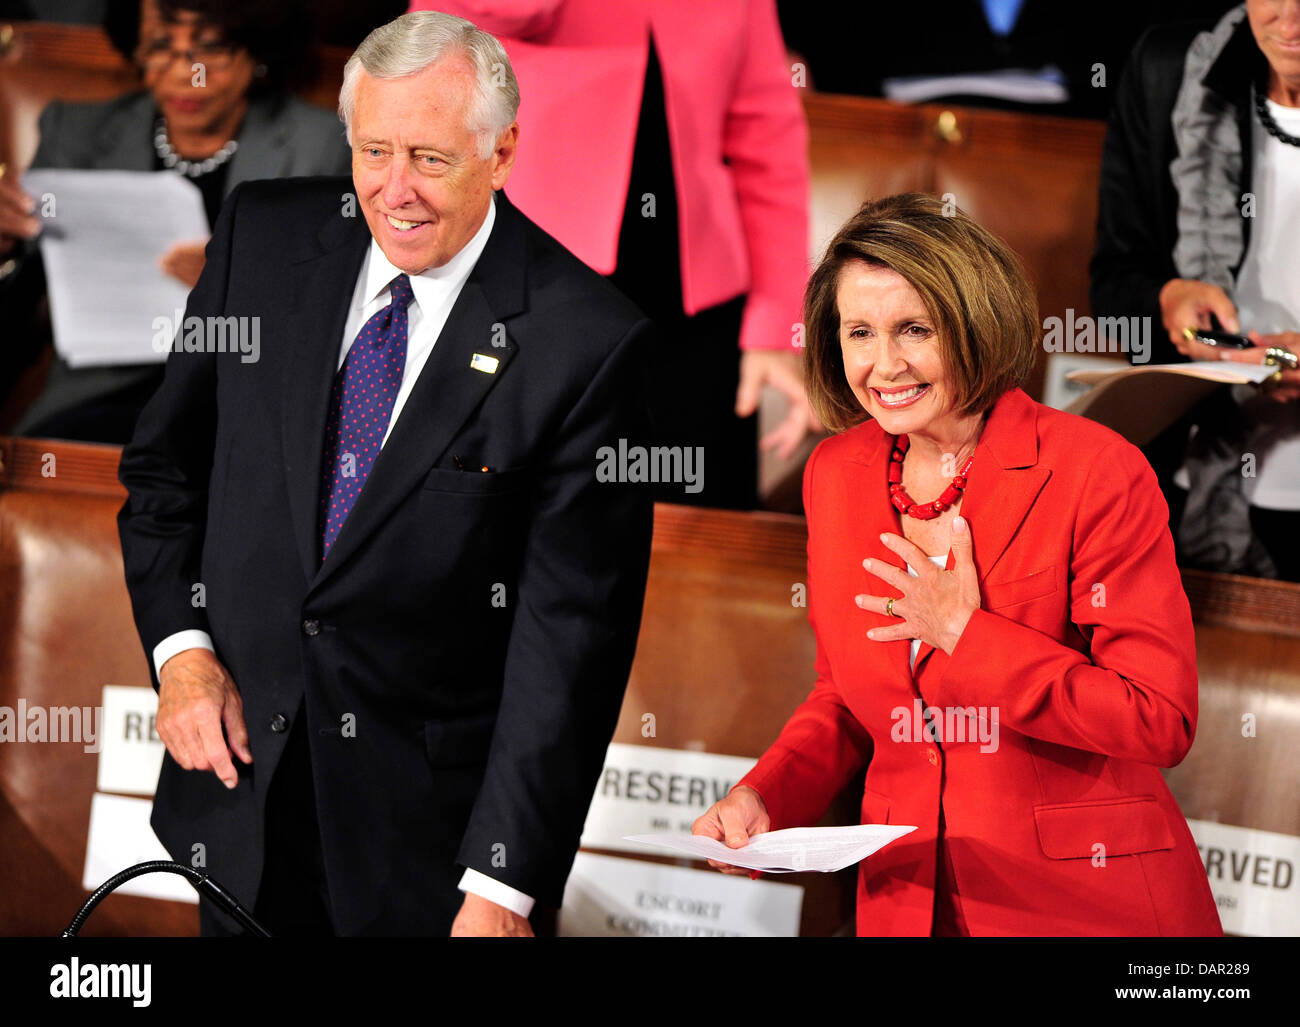 United States House Democratic Whip Steny Hoyer (Democrat of Maryland) and U.S. House Democratic Leader Nancy Pelosi (Democrat of California) await the arrival of U.S. President Barack Obama to deliver an address on jobs andthe economy to a Joint Session of Congress at the Capitol in Washington, D.C. on Thursday, September 8, 2011..Credit: Ron Sachs / CNP.(RESTRICTION: NO New York  Stock Photo